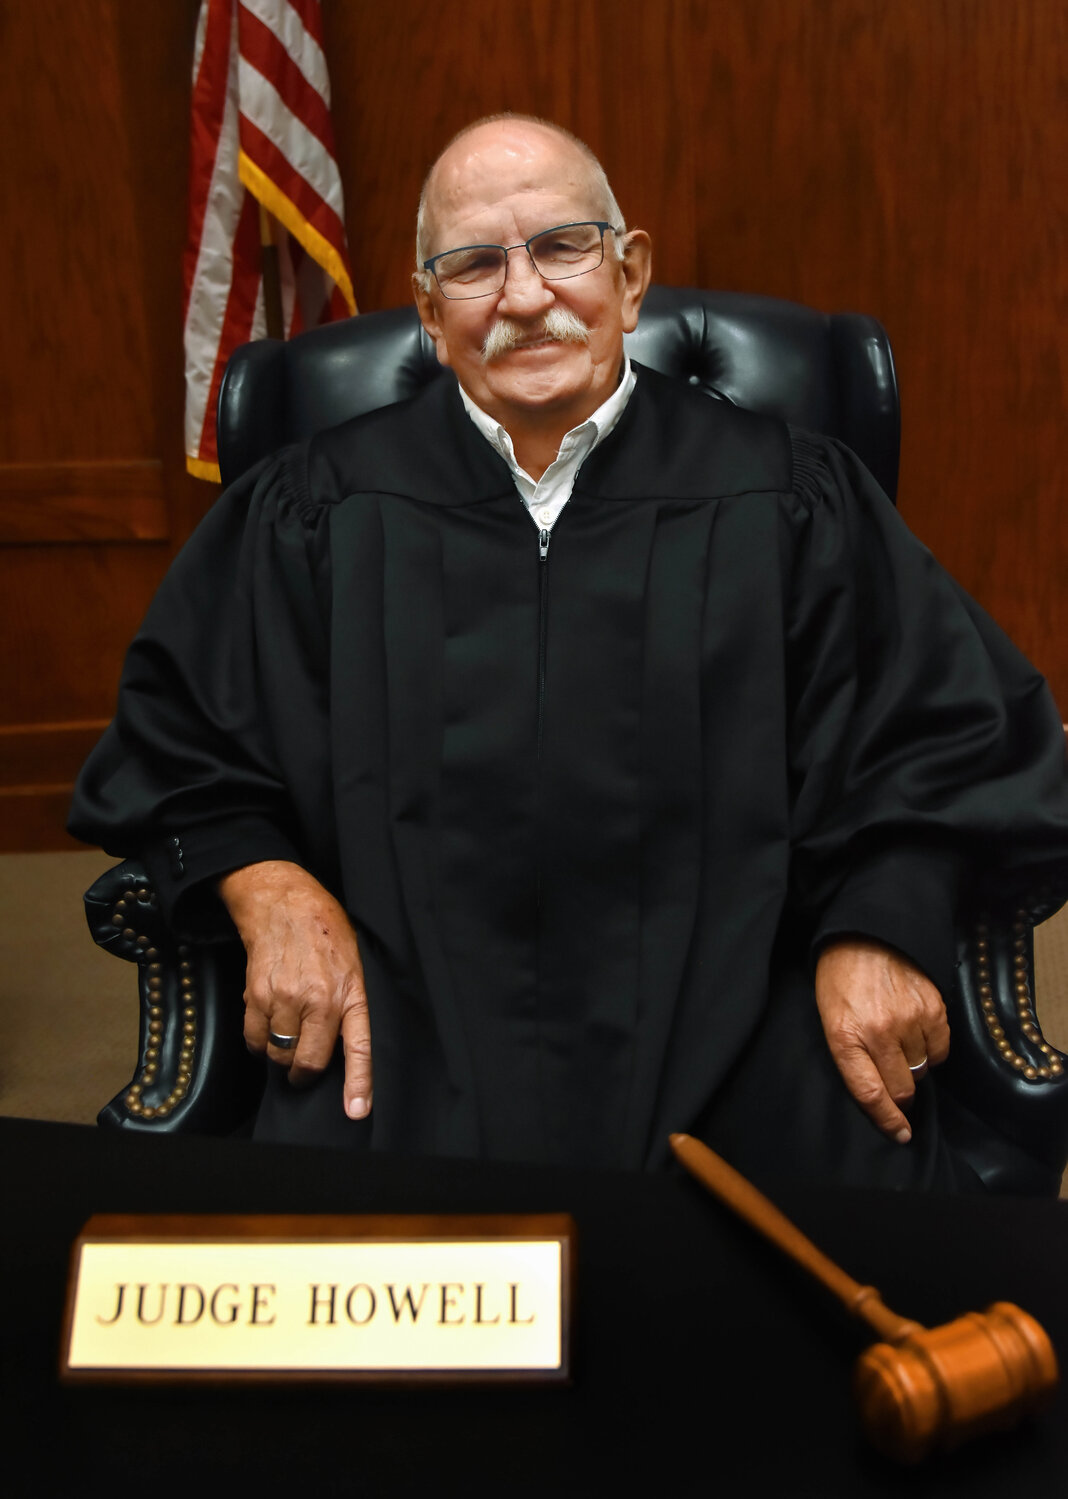 Precinct 1 Justice of the Peace Roger "Cotton" Howell has served on the bench since 2013.